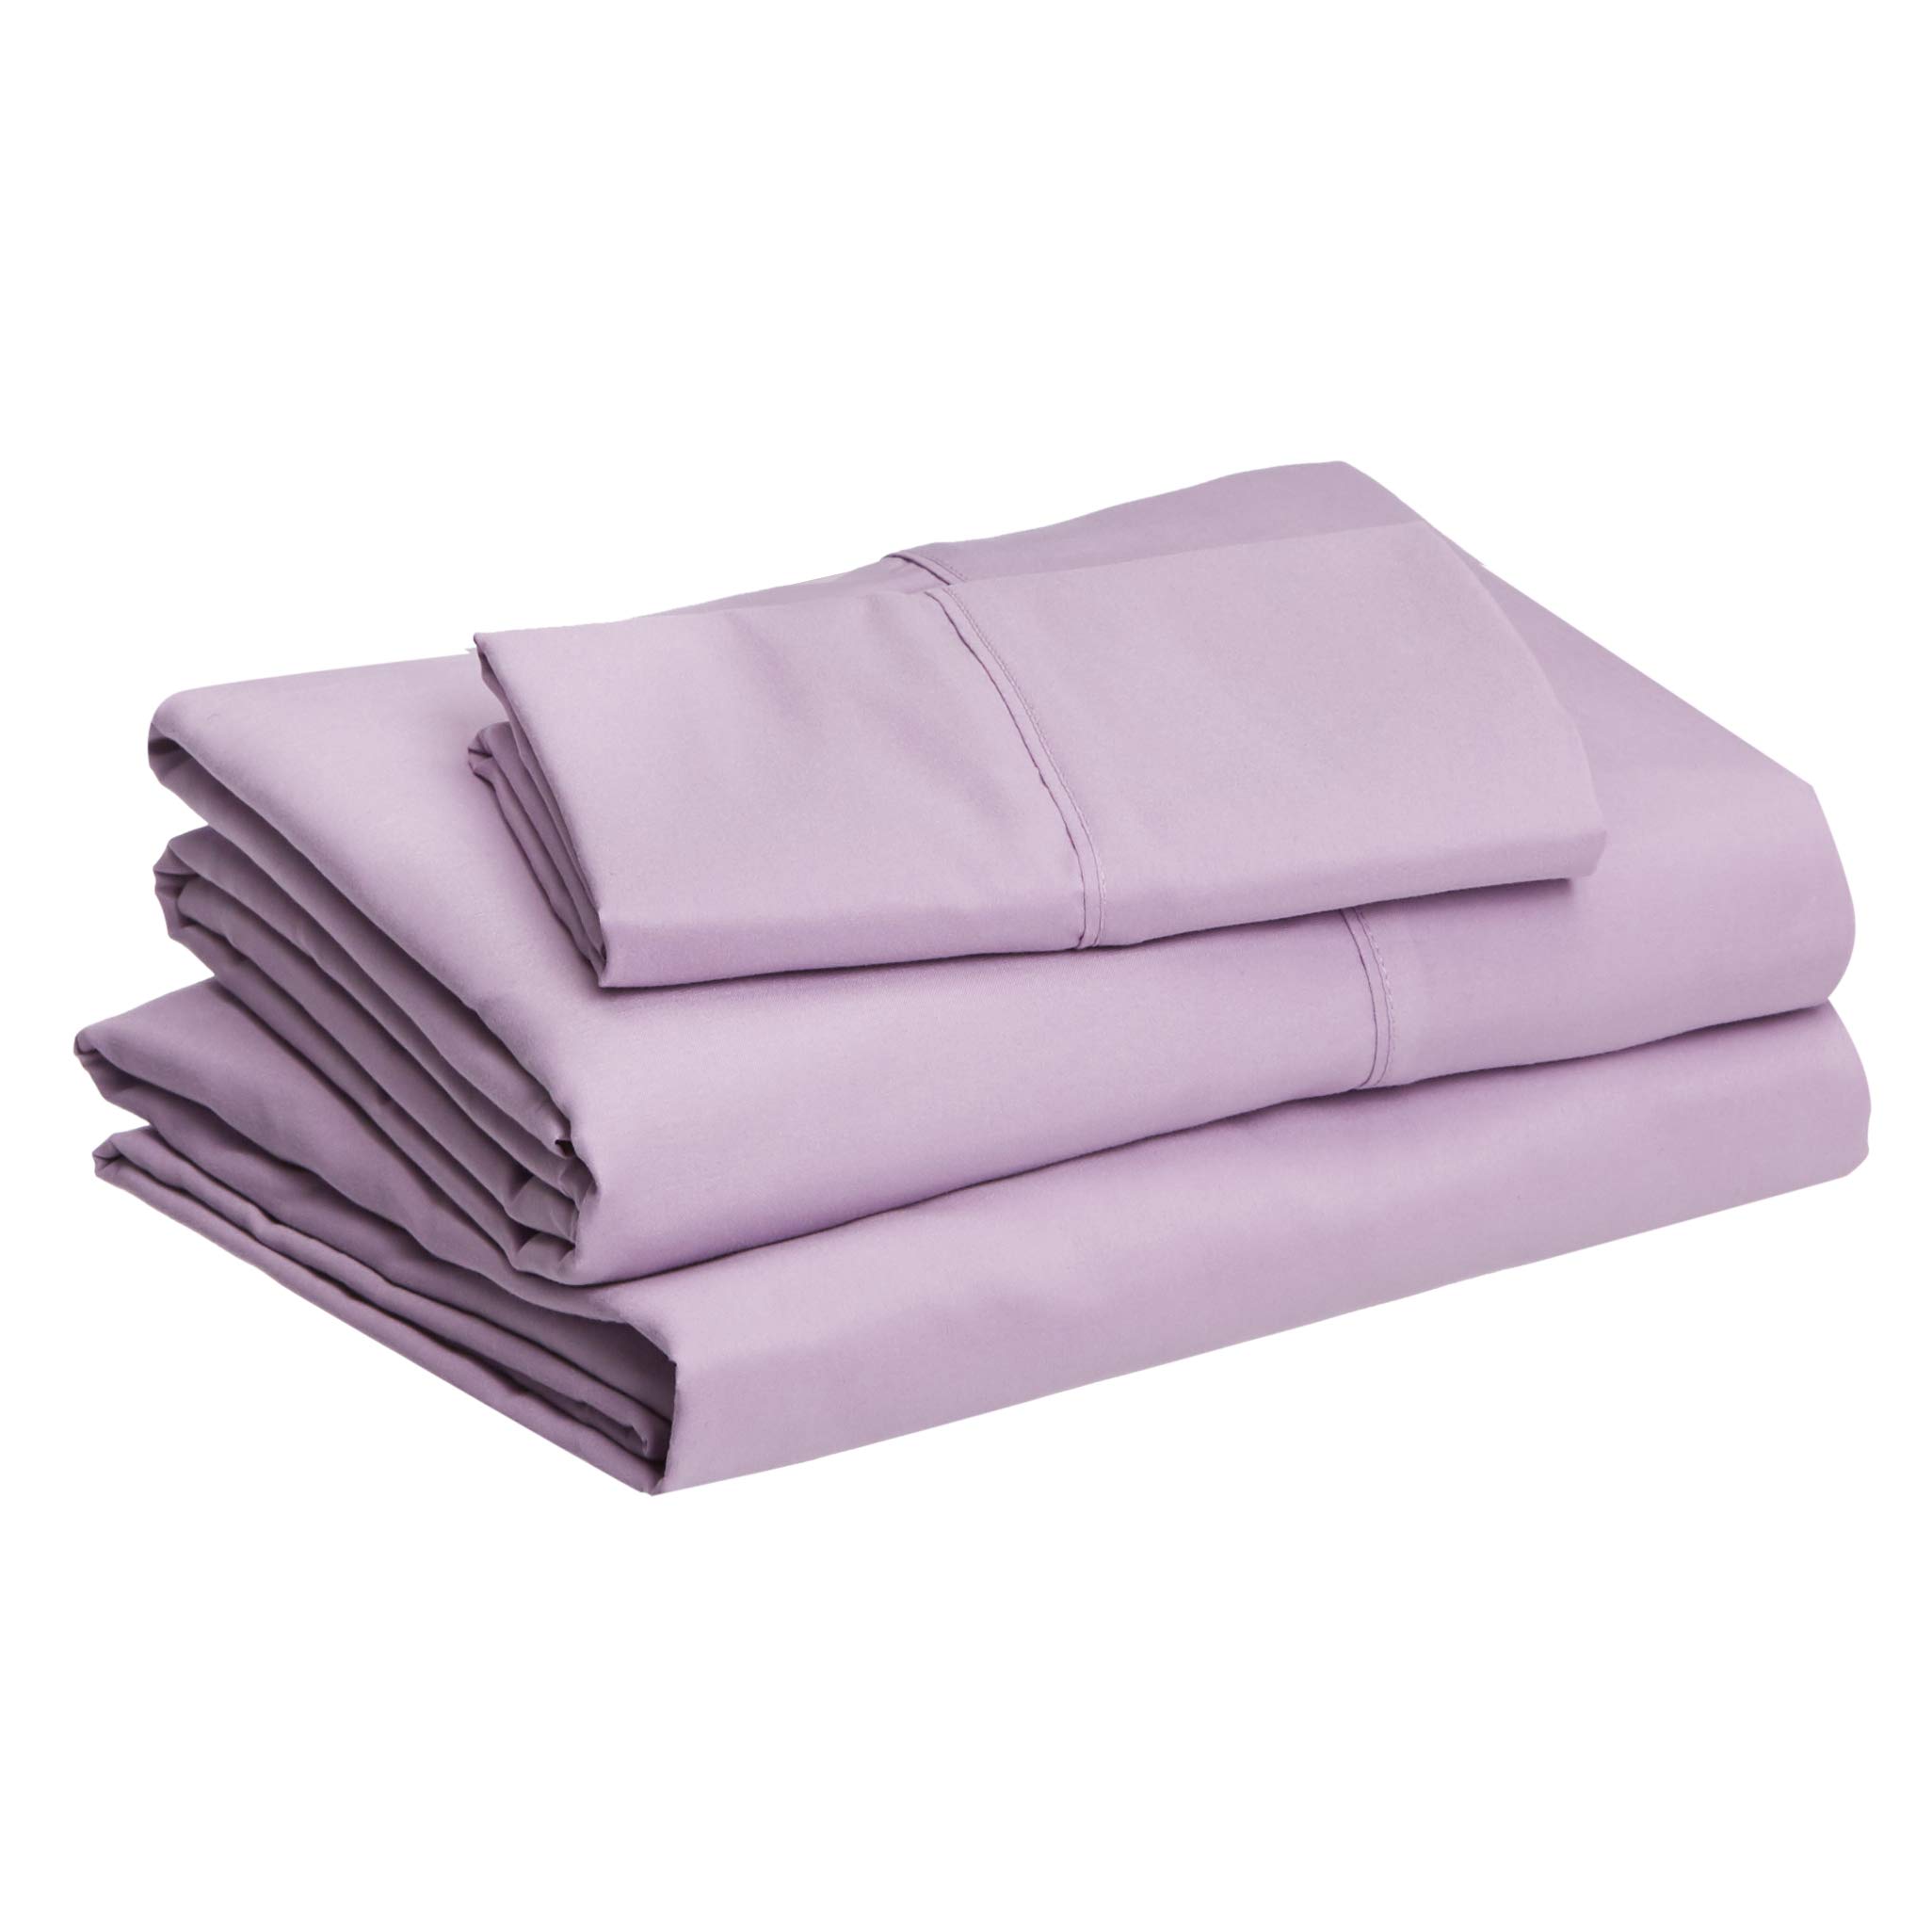 Book Cover Amazon Basics Lightweight Super Soft Easy Care Microfiber 3 Piece Bed Sheet Set With 14-Inch Deep Pockets, Twin, Frosted Lavender, Solid Twin Sheet Set Frosted Lavender